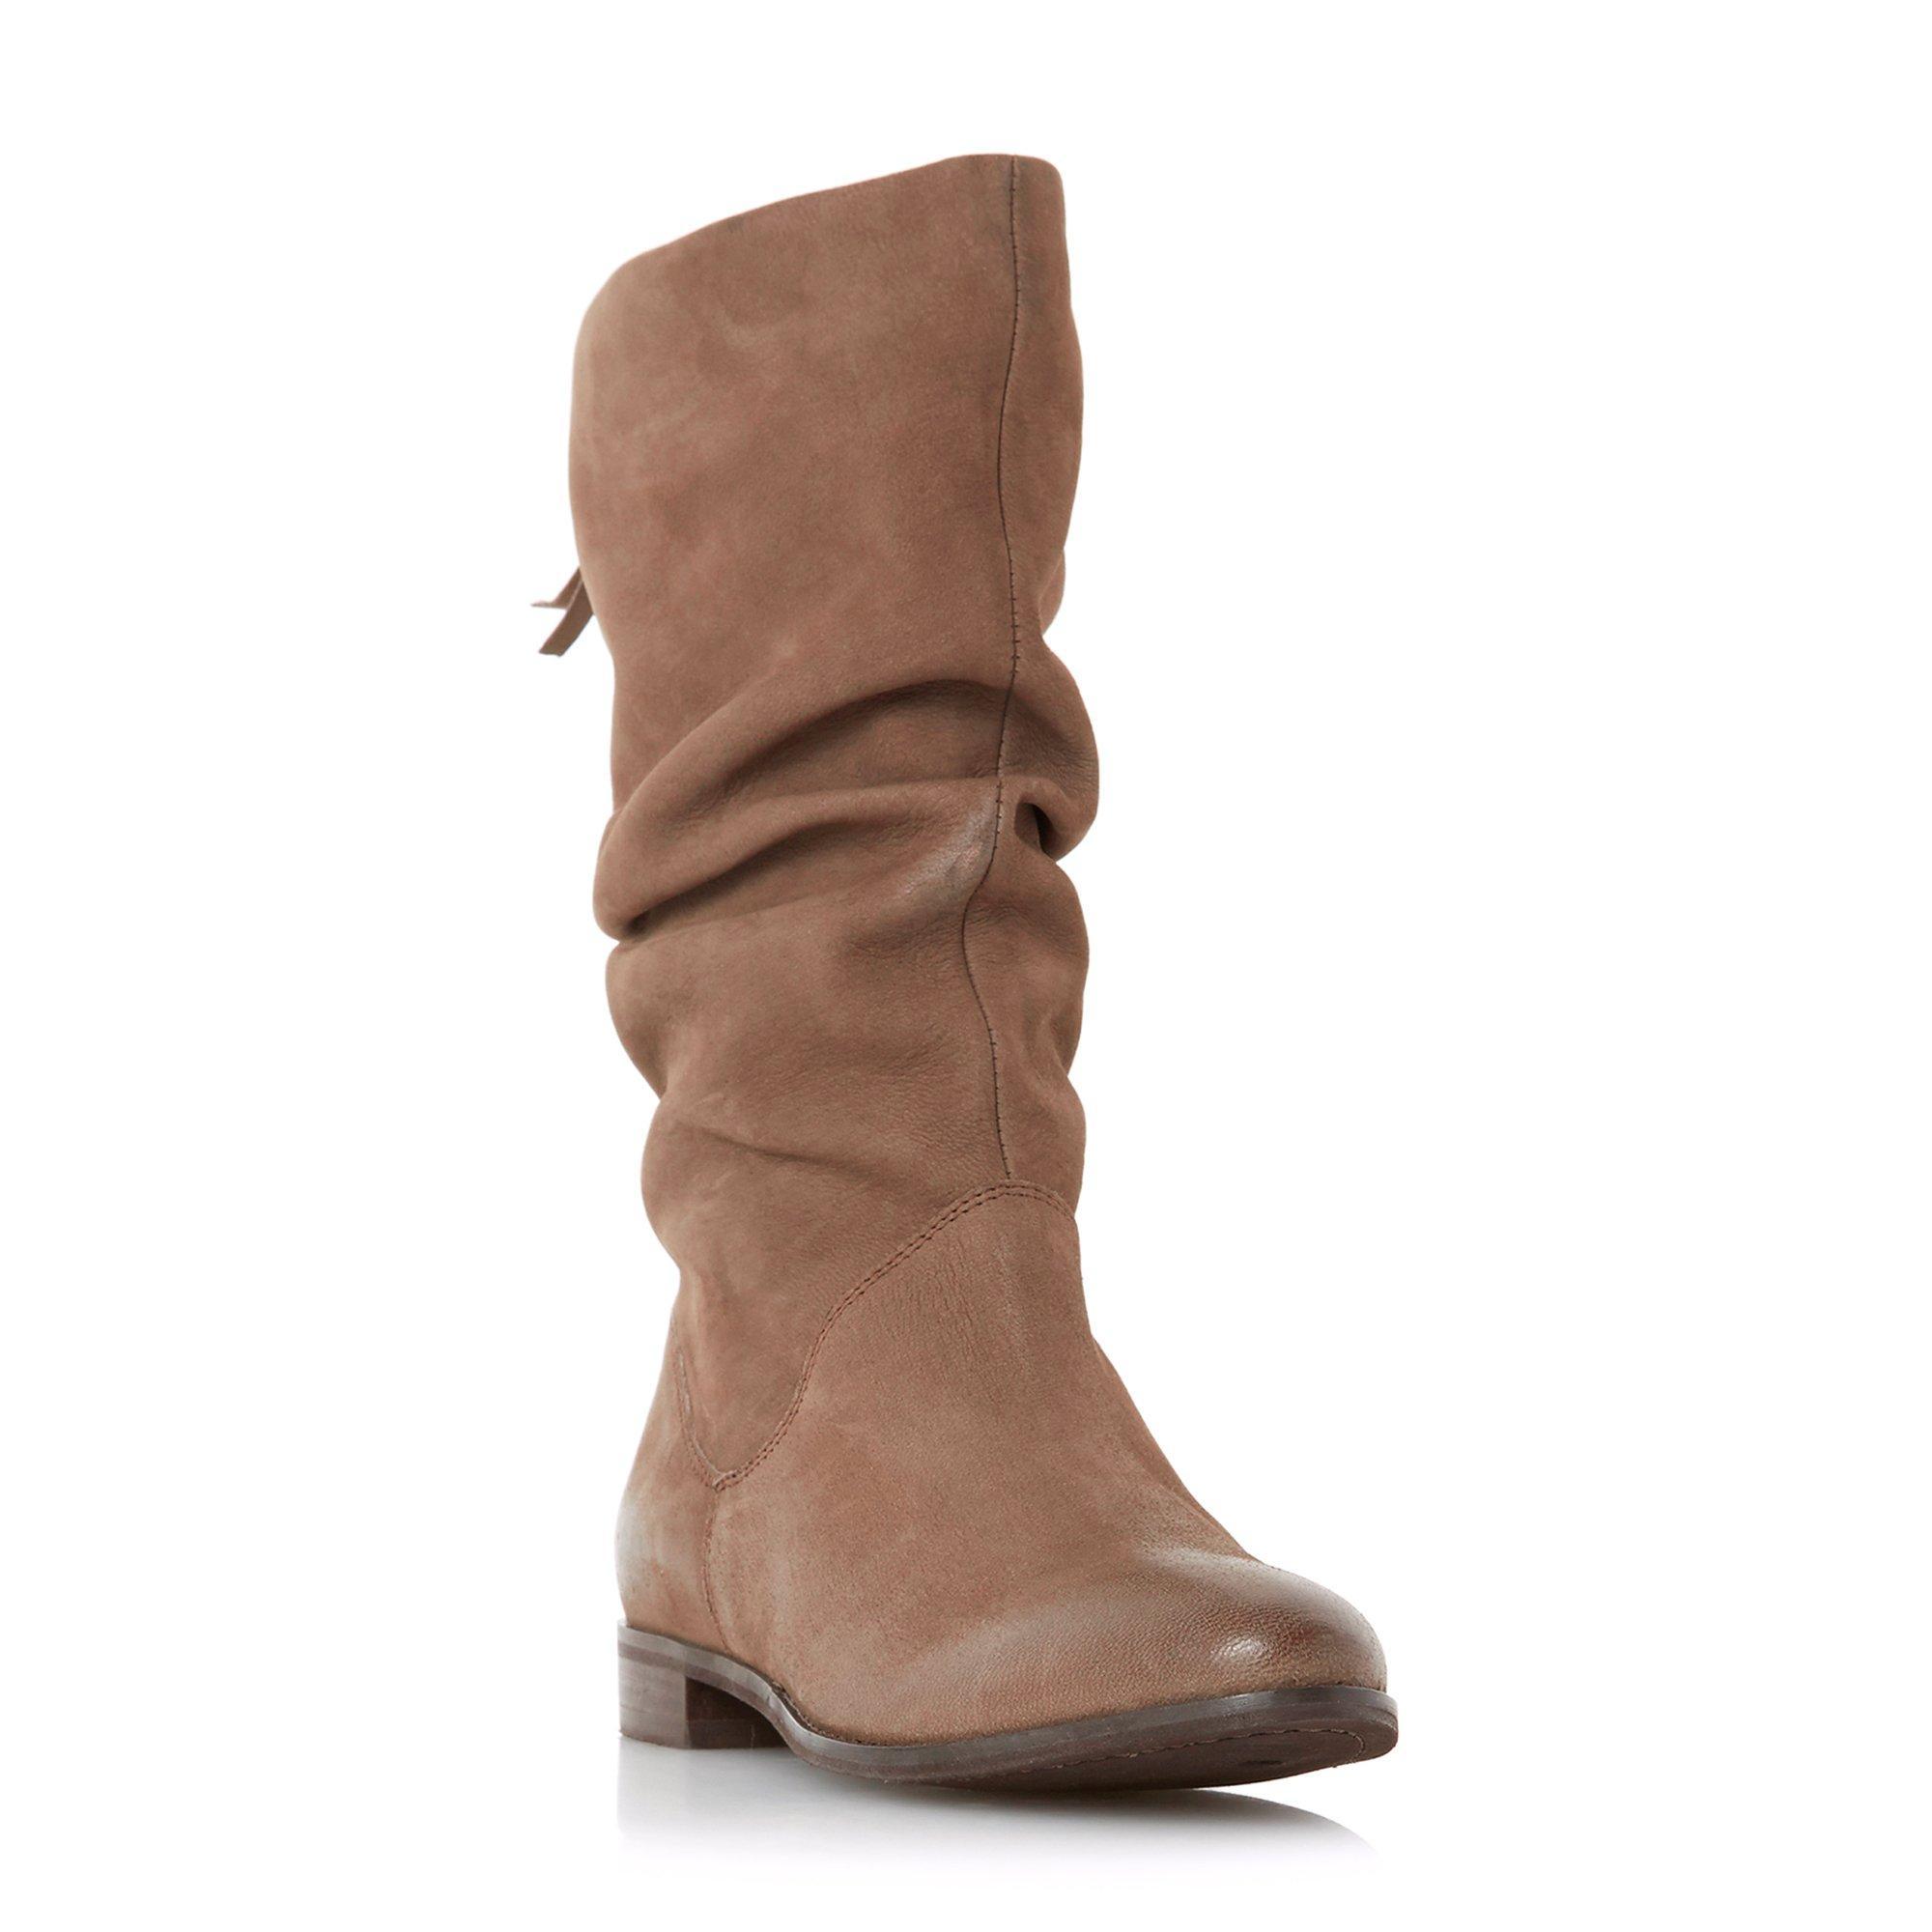 Dune Rosalind Ruched Leather Calf Boots in Taupe (Brown) - Save 34% - Lyst